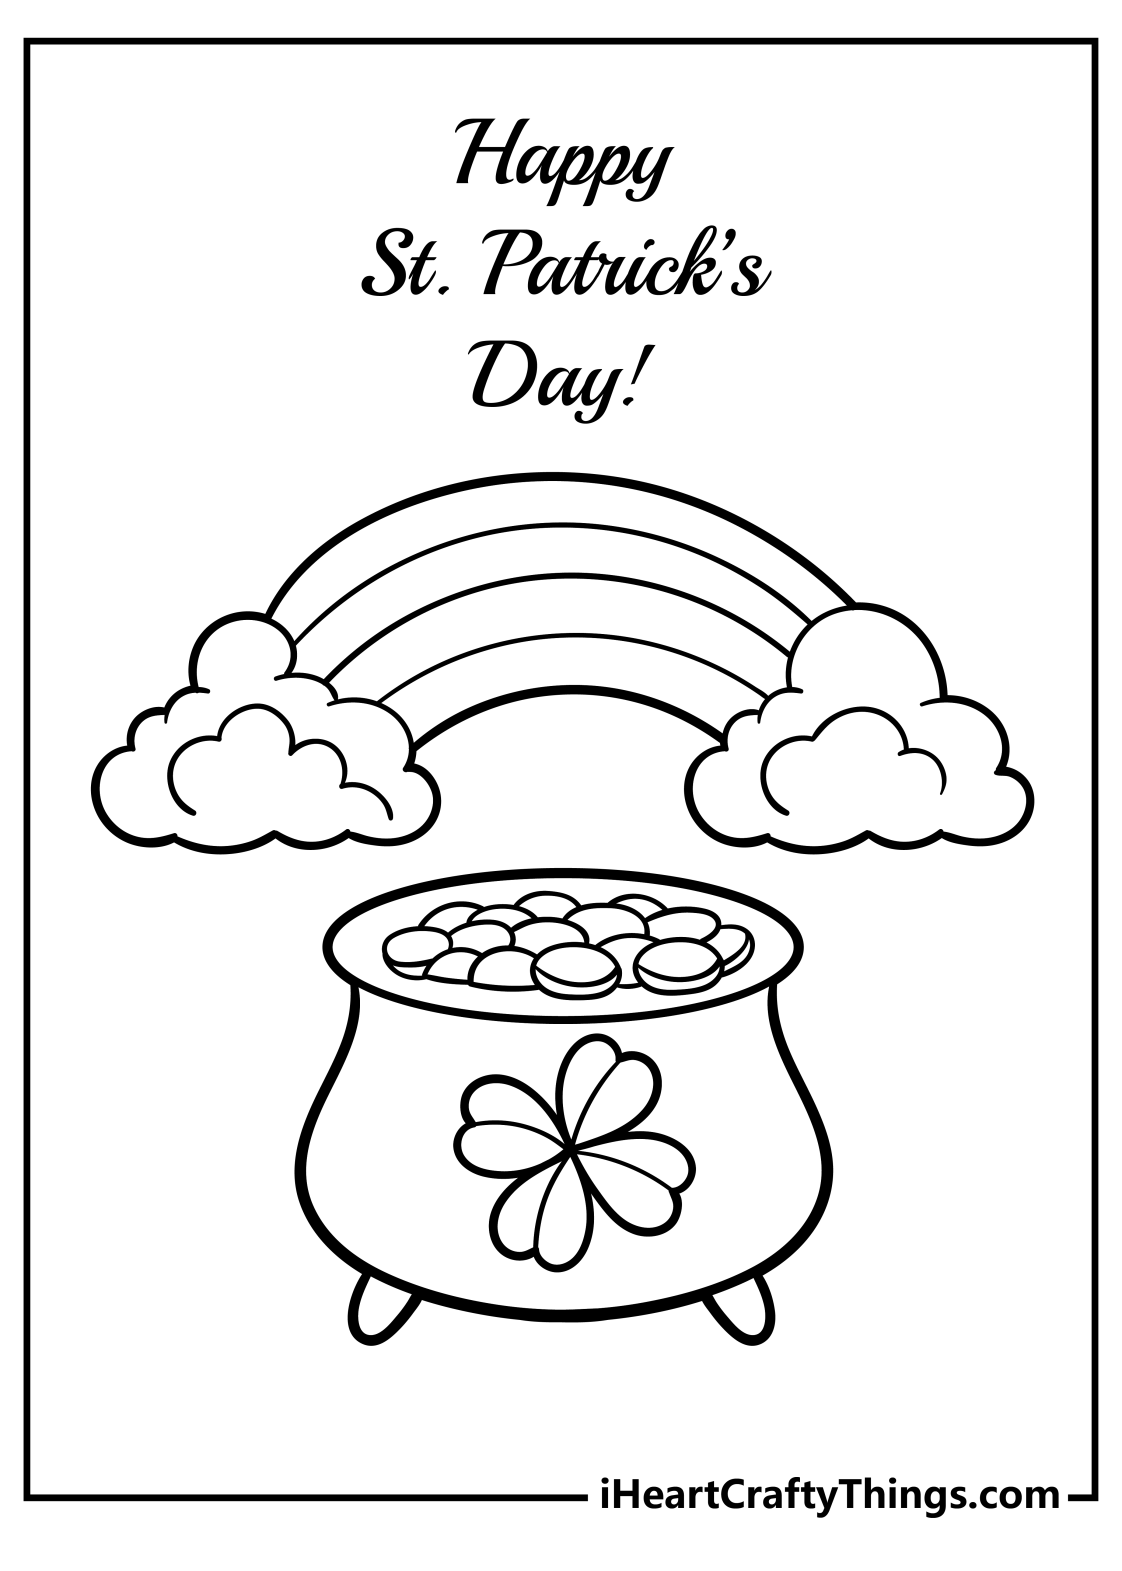 St Patrick’s Day Coloring Pages (100% Free Printables)